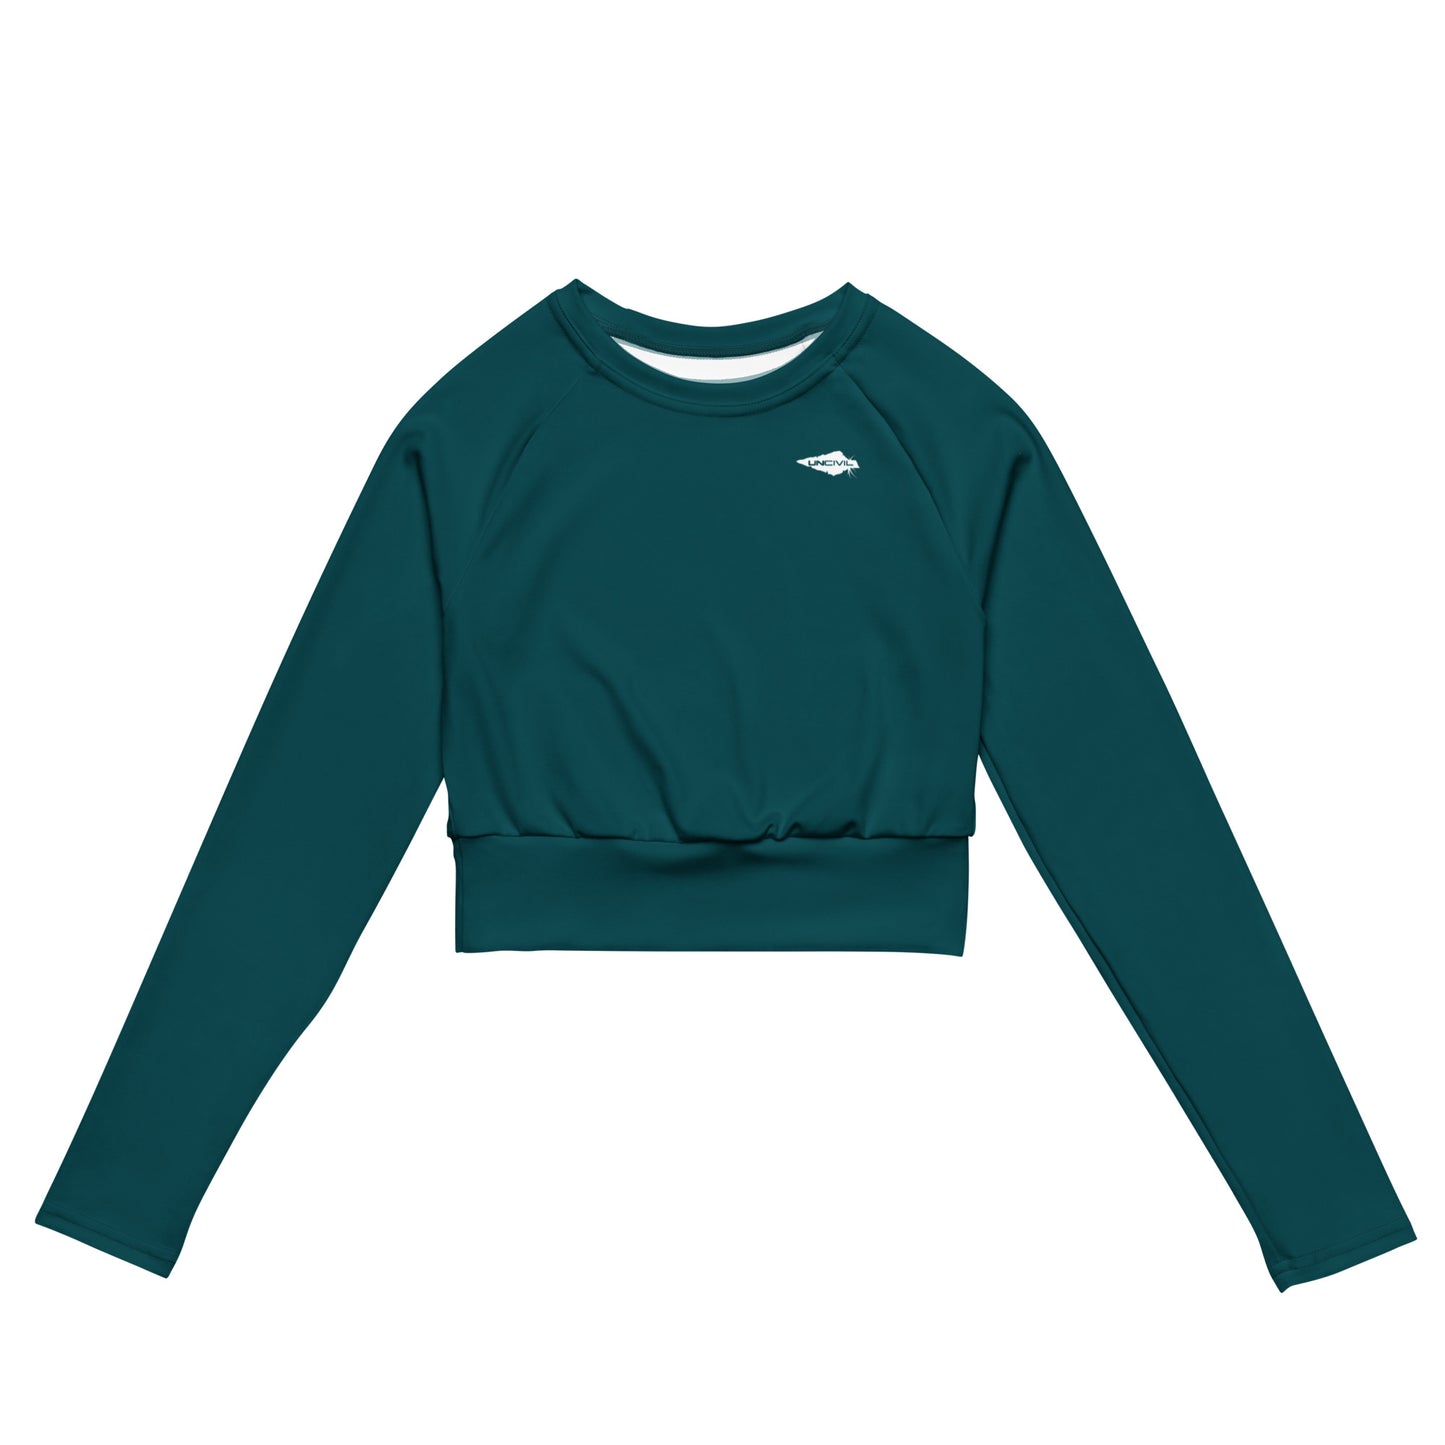 Teal long-sleeve crop top for women is made of recycled polyester and elastane, making it an eco-friendly choice for swimming, sports, or athleisure. UPF 50+.